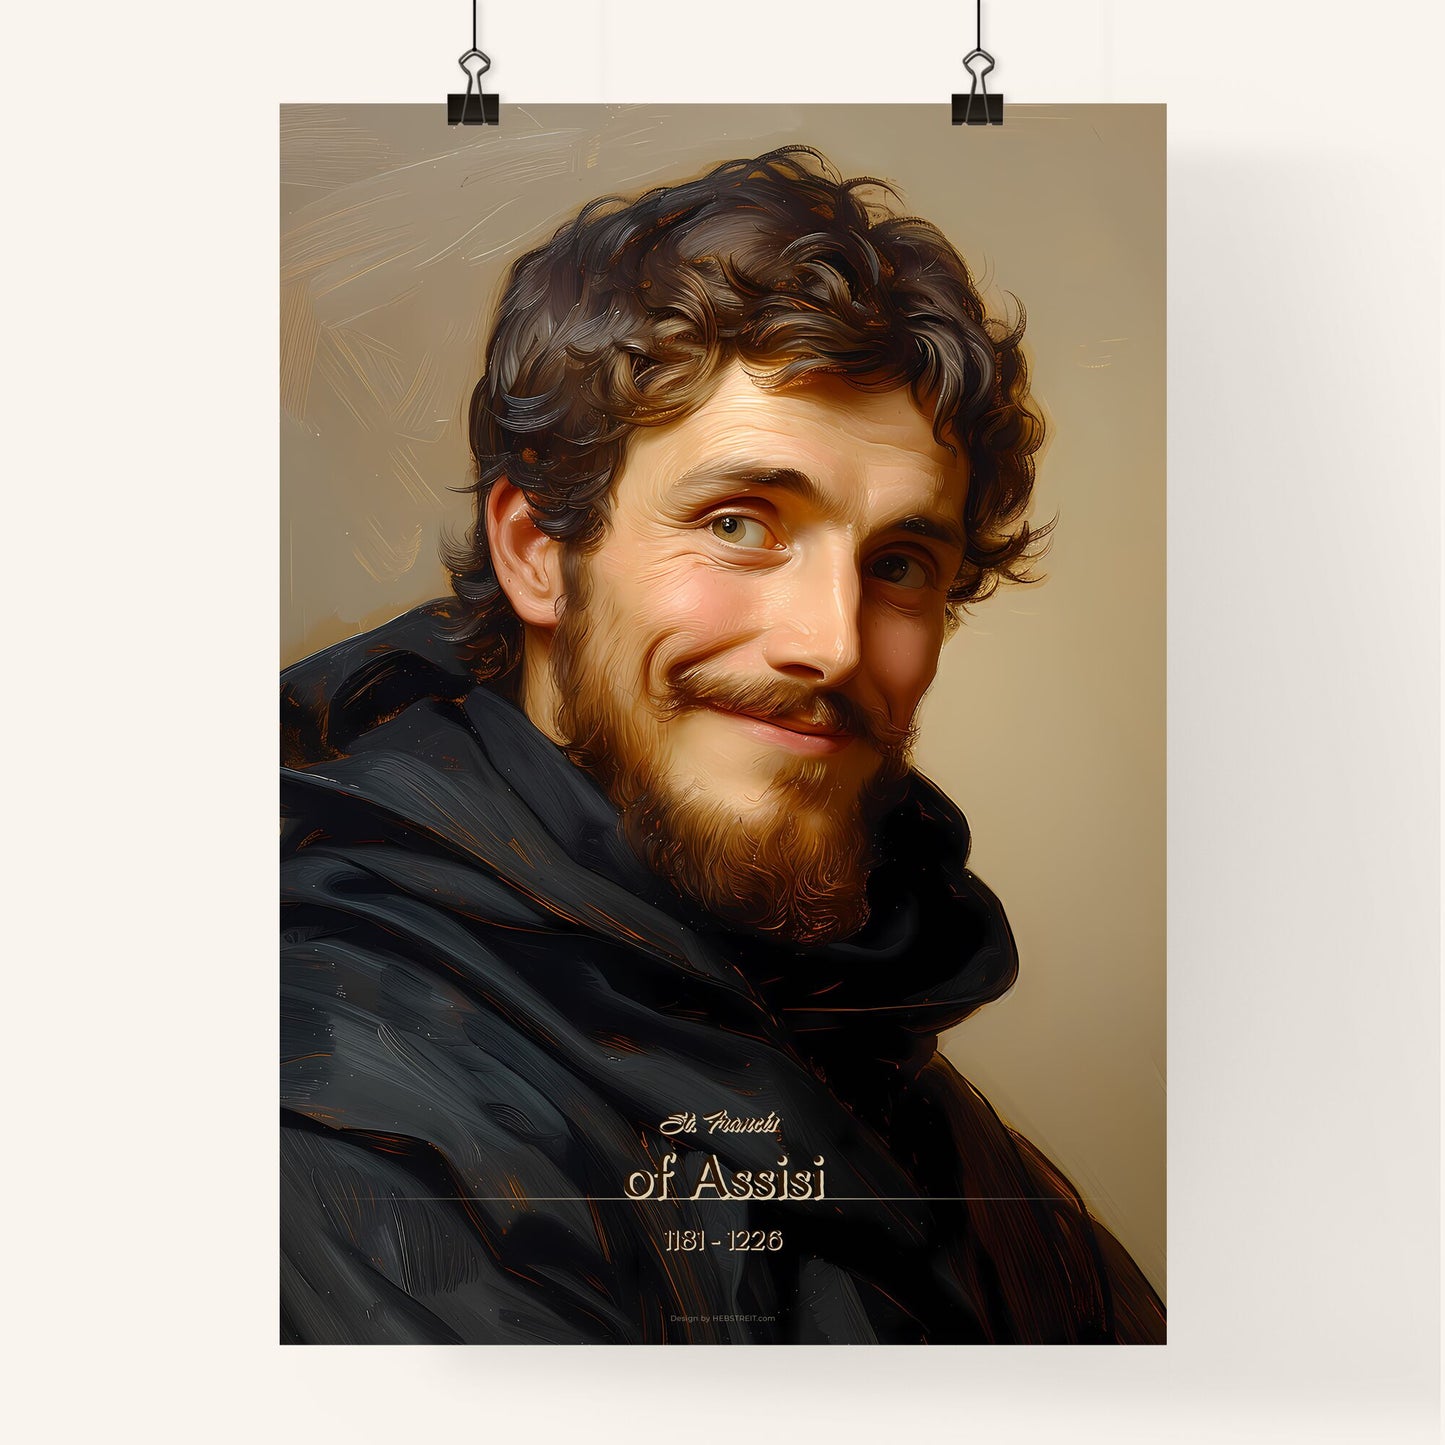 St. Francis, of Assisi, 1181 - 1226, A Poster of a man with a beard and mustache Default Title